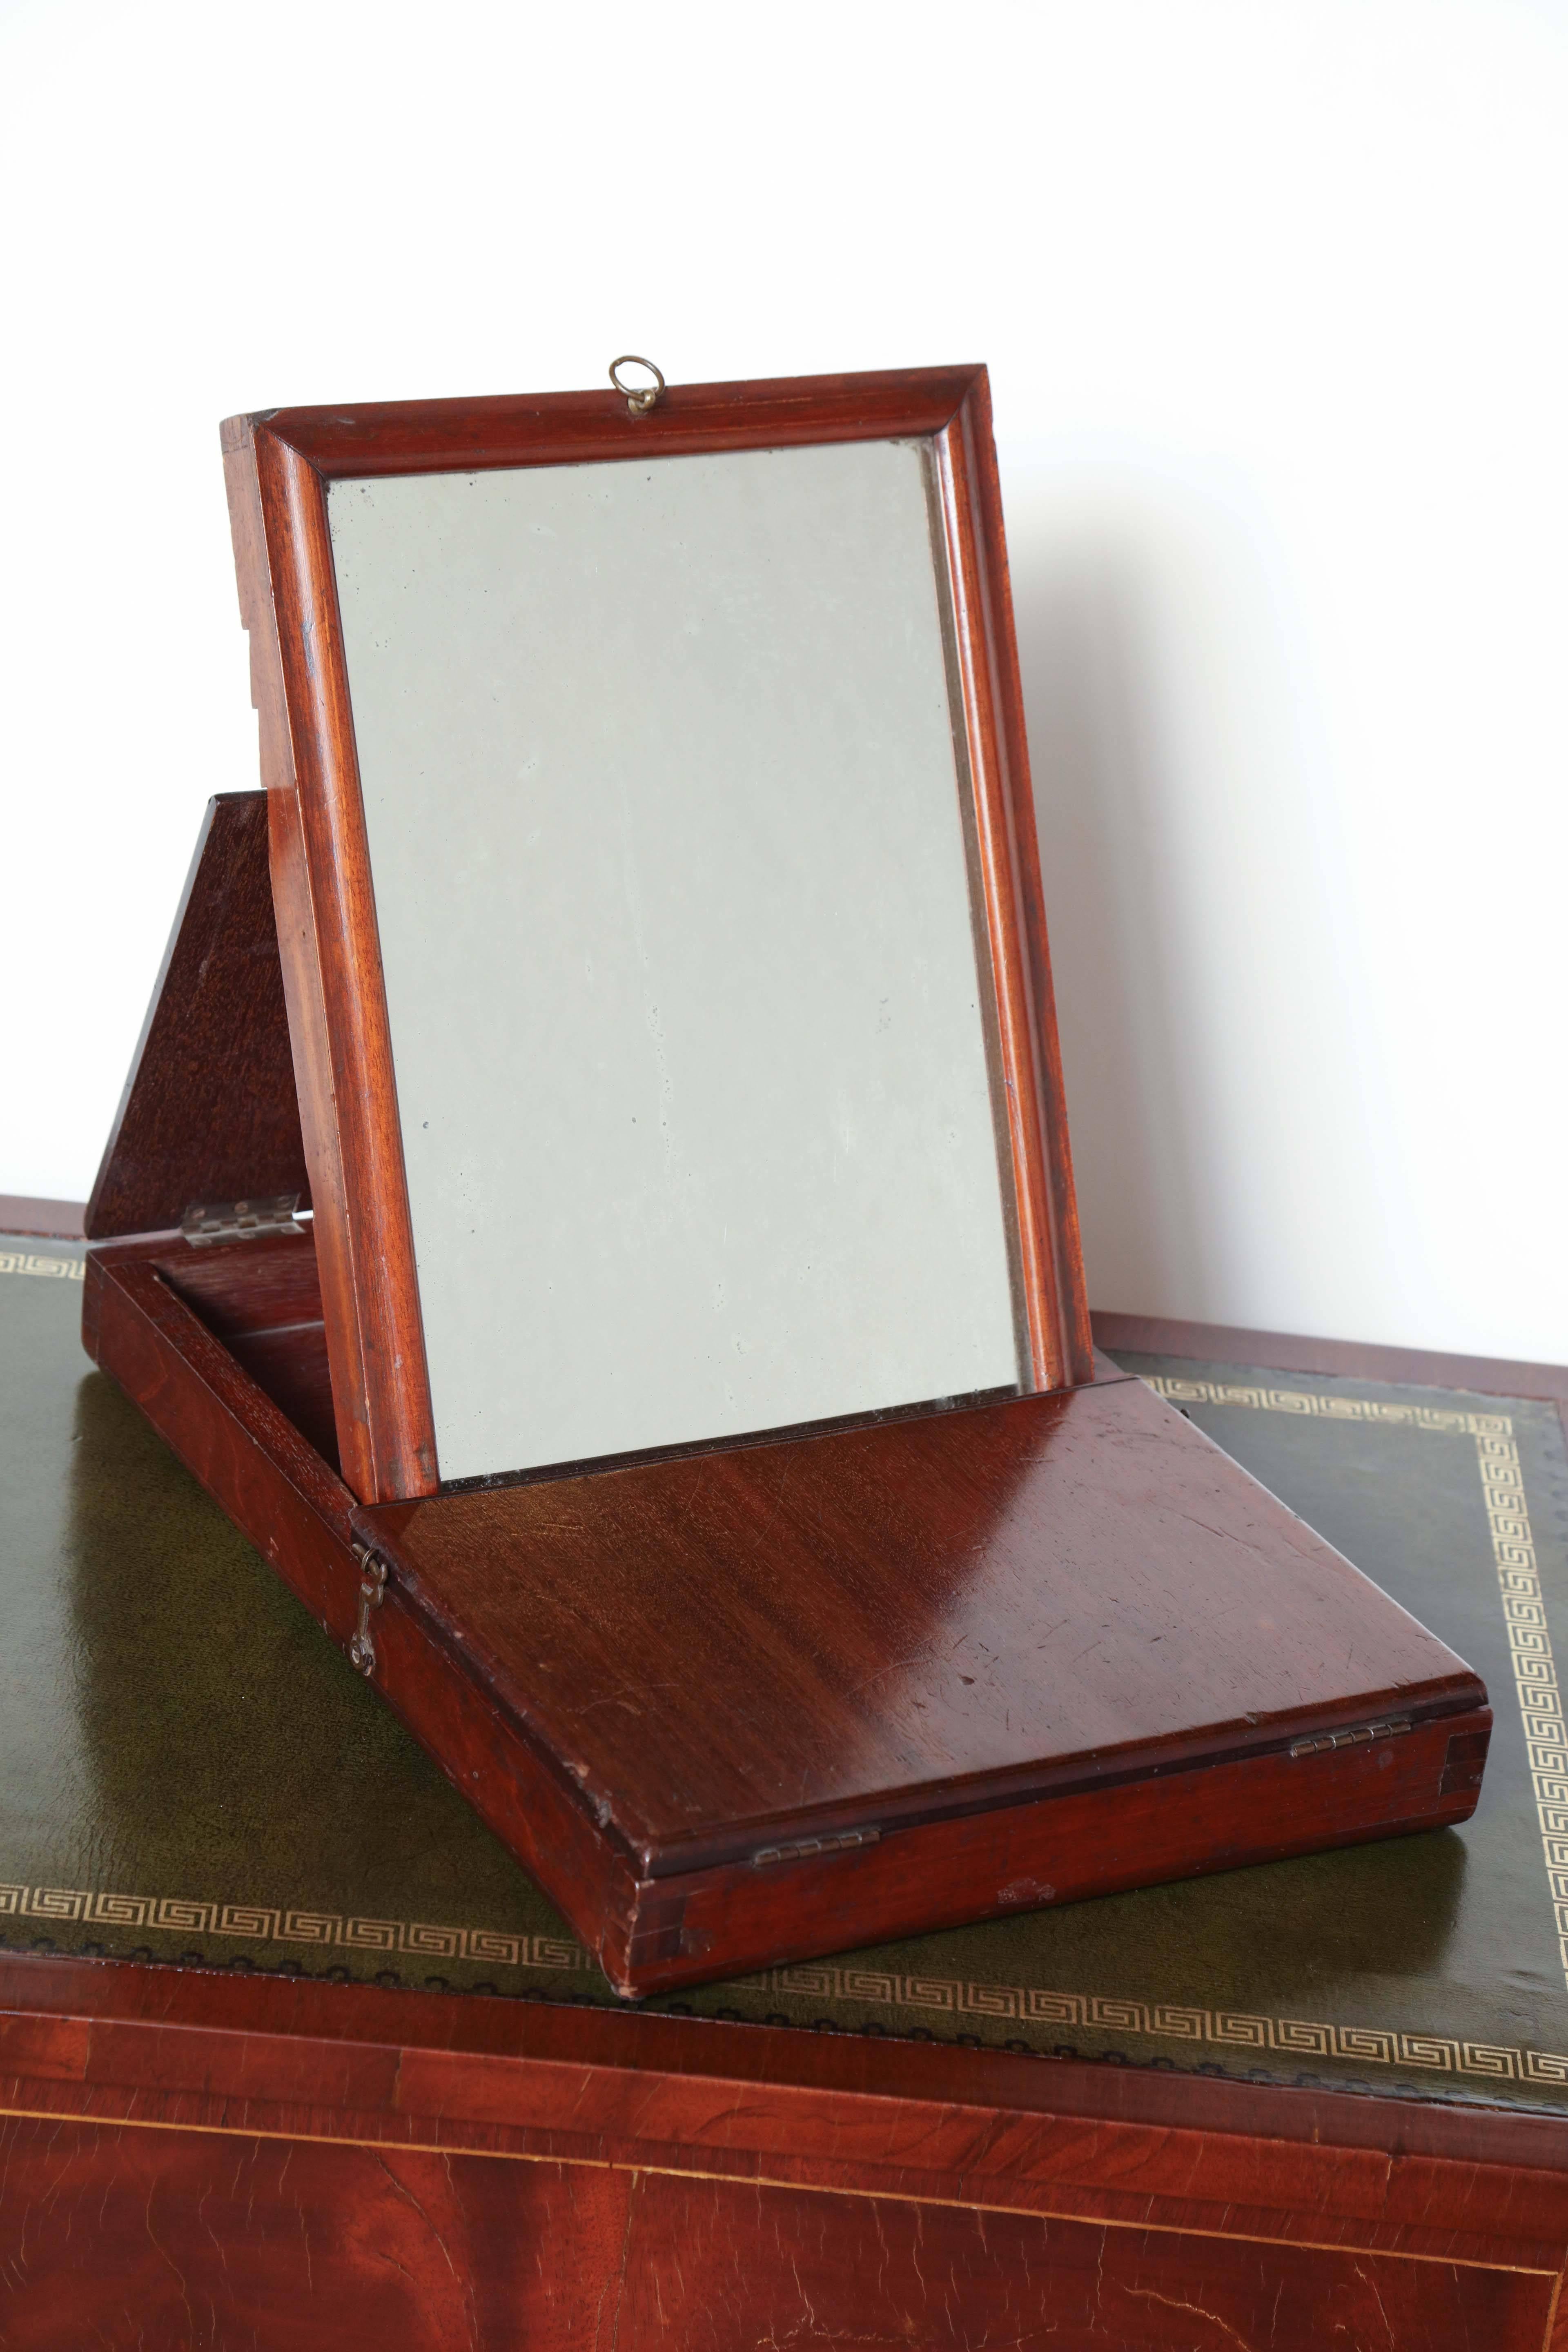 19th century English campaign mirror in mahogany box with two flaps and adjustable mirror.